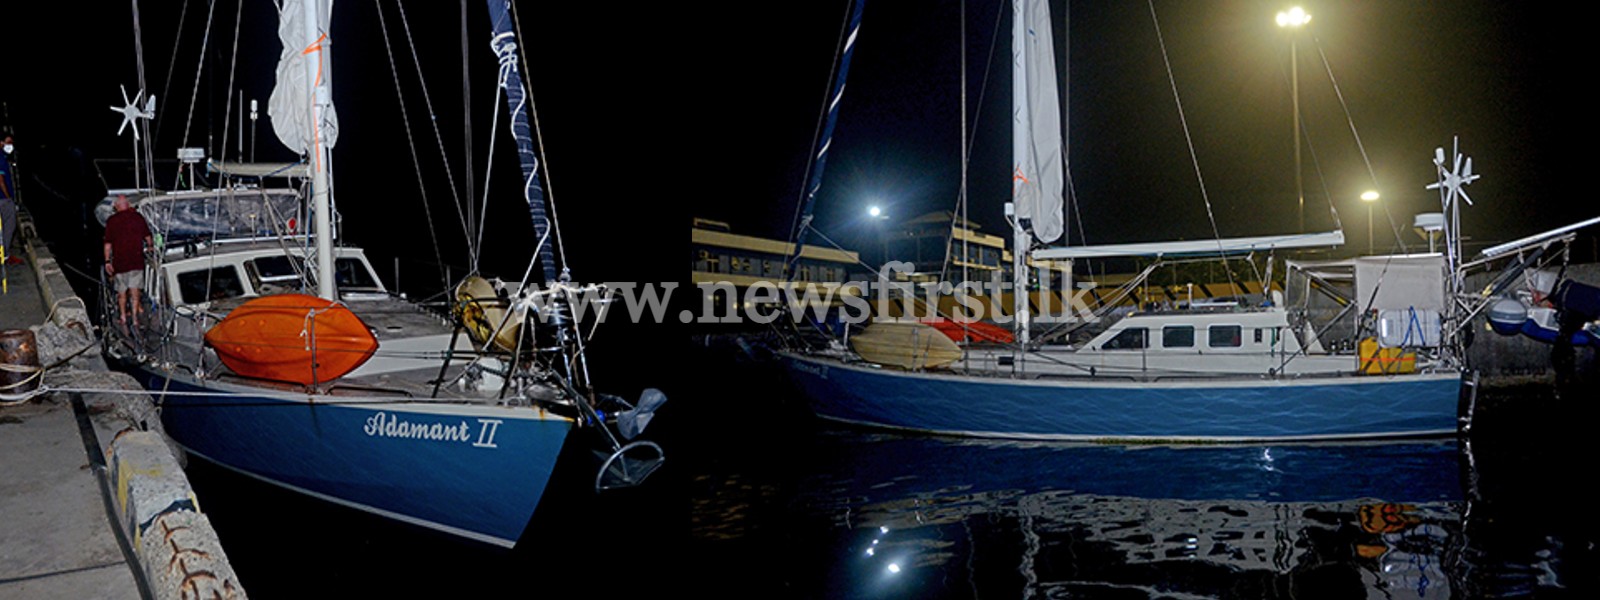 Navy assistance for distressed sailing boat